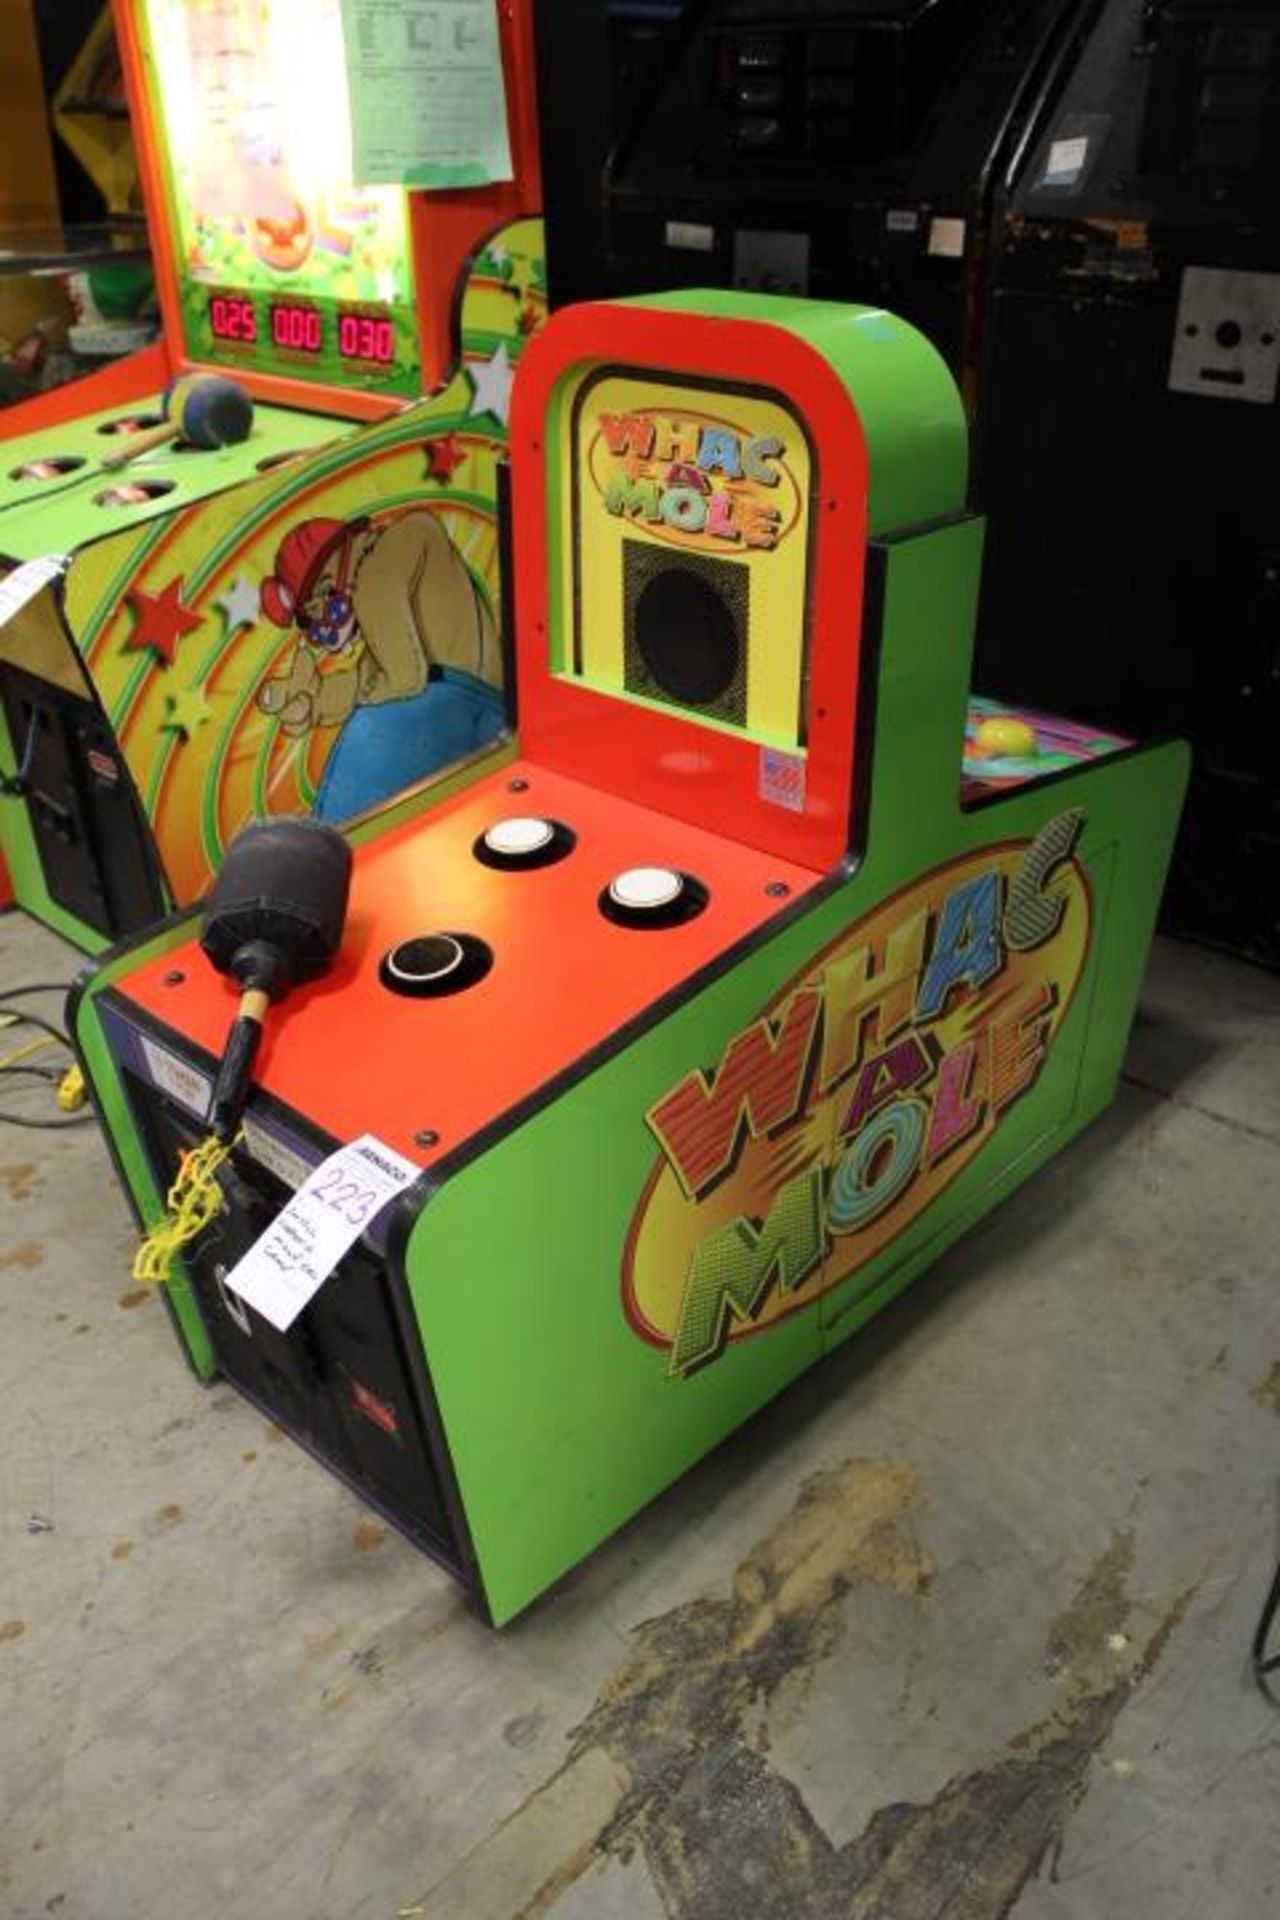 1X, SMALL WHACK-A-MOLE DOUBLE GAME - AS IS PARTS ONLY - Image 5 of 9